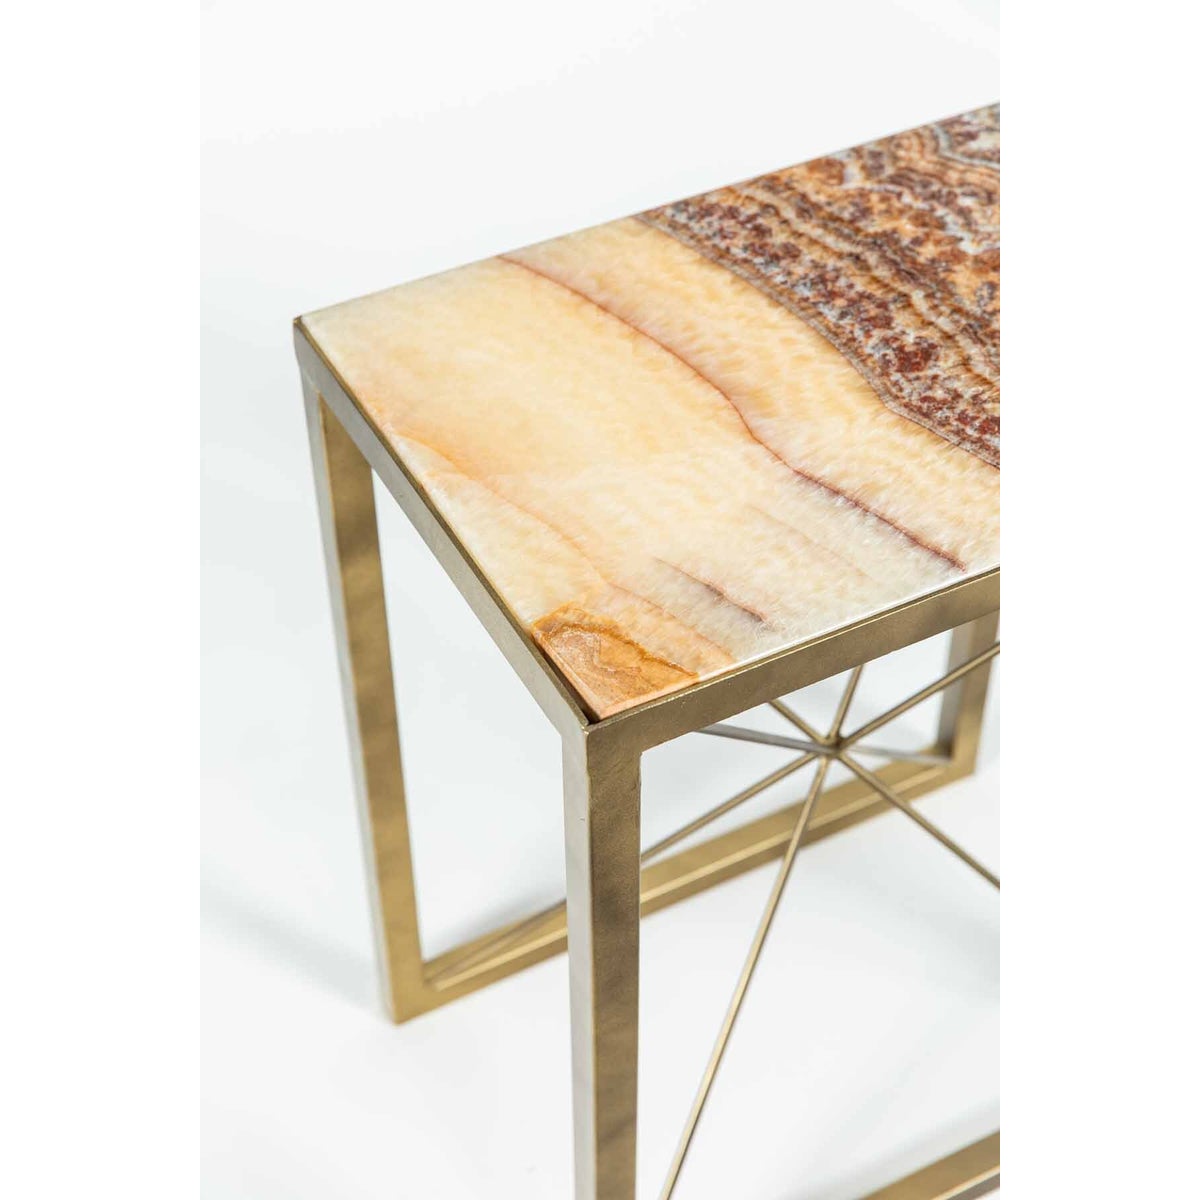 Sebastian Accent Table in Antique Brass w/ Red Onyx Top